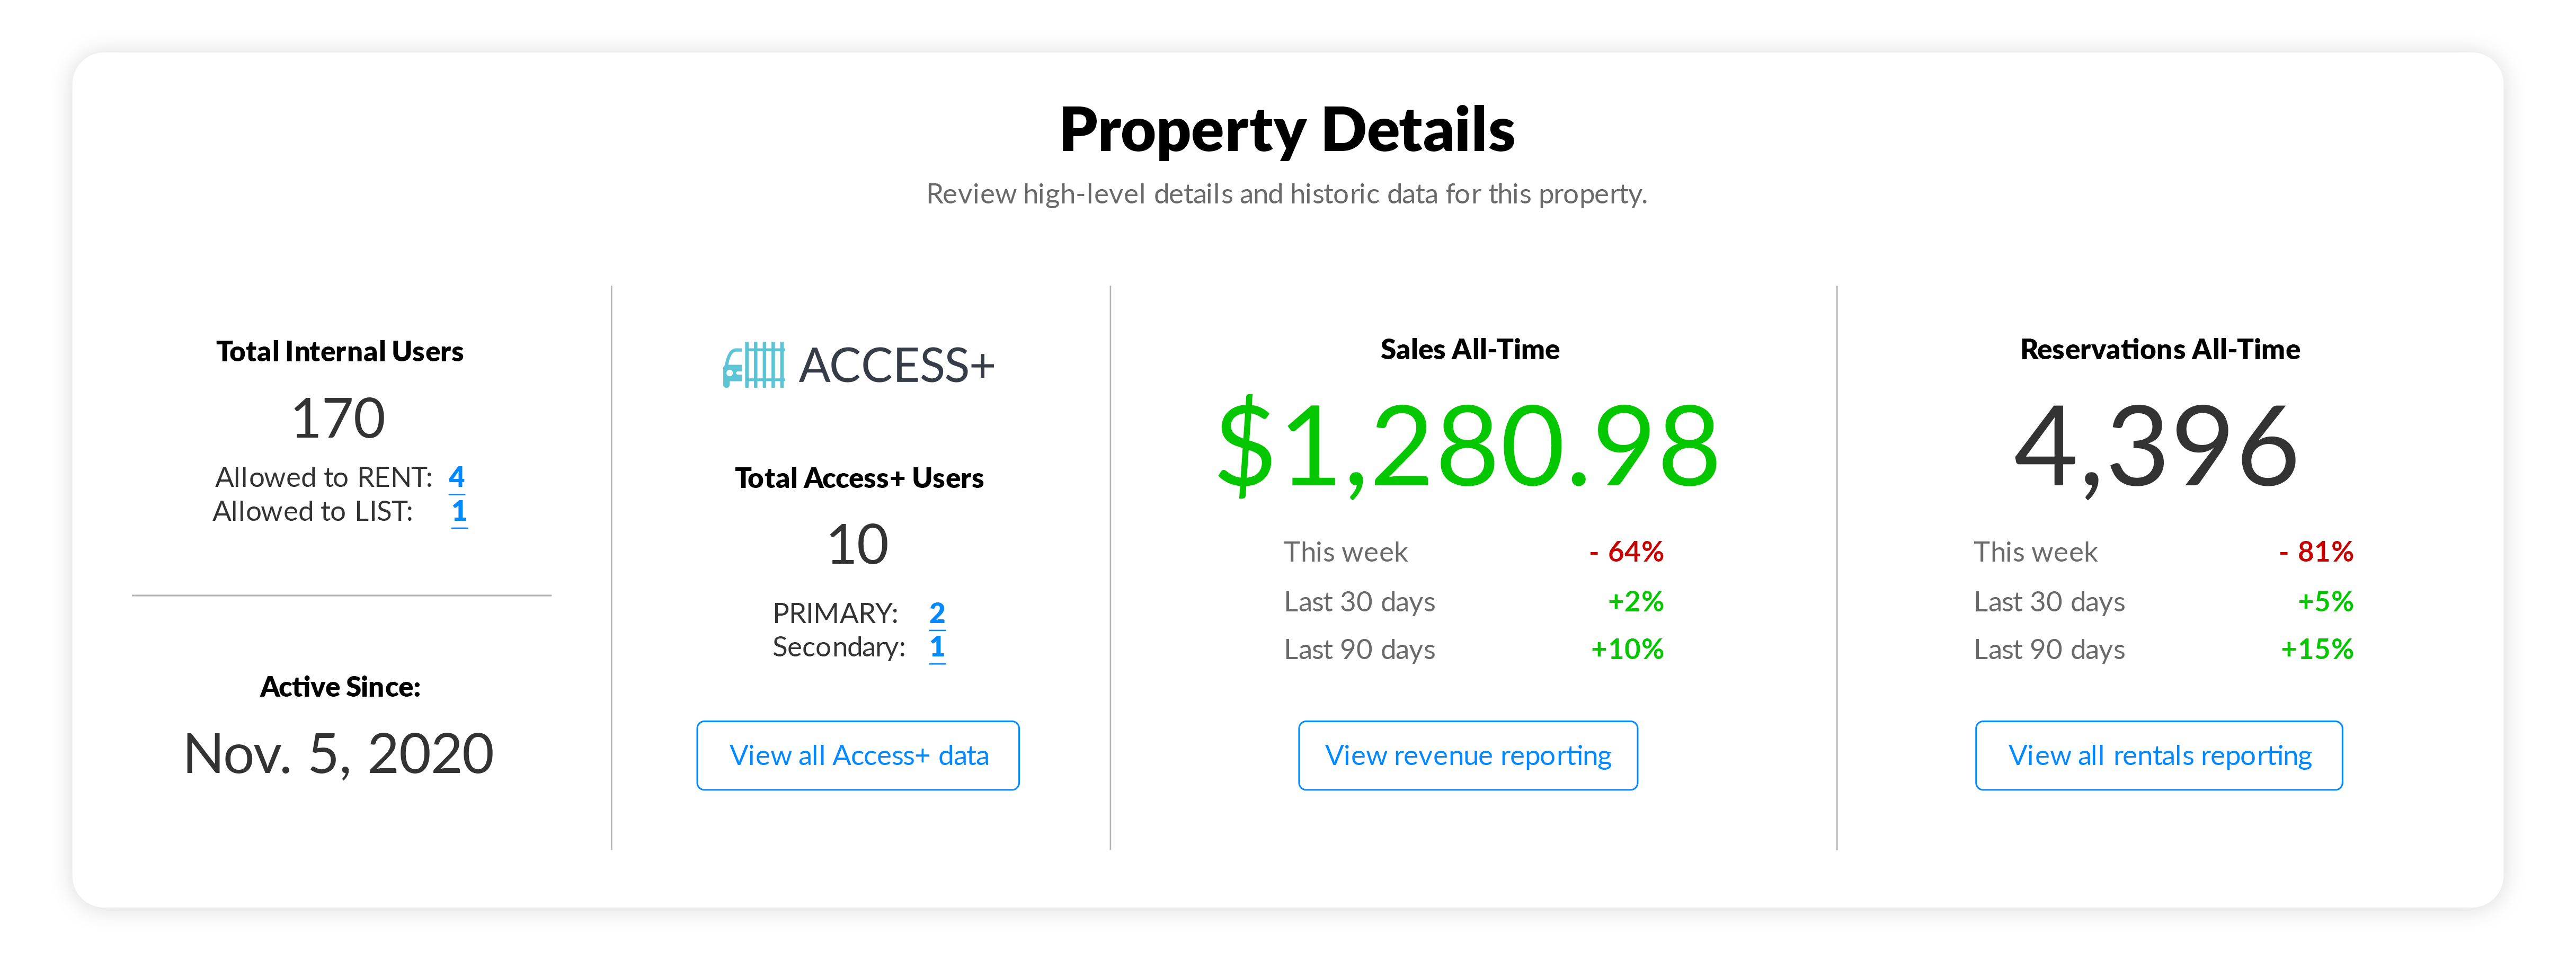 Property Details | ParqEx Reporting Dashboard Admin Portal